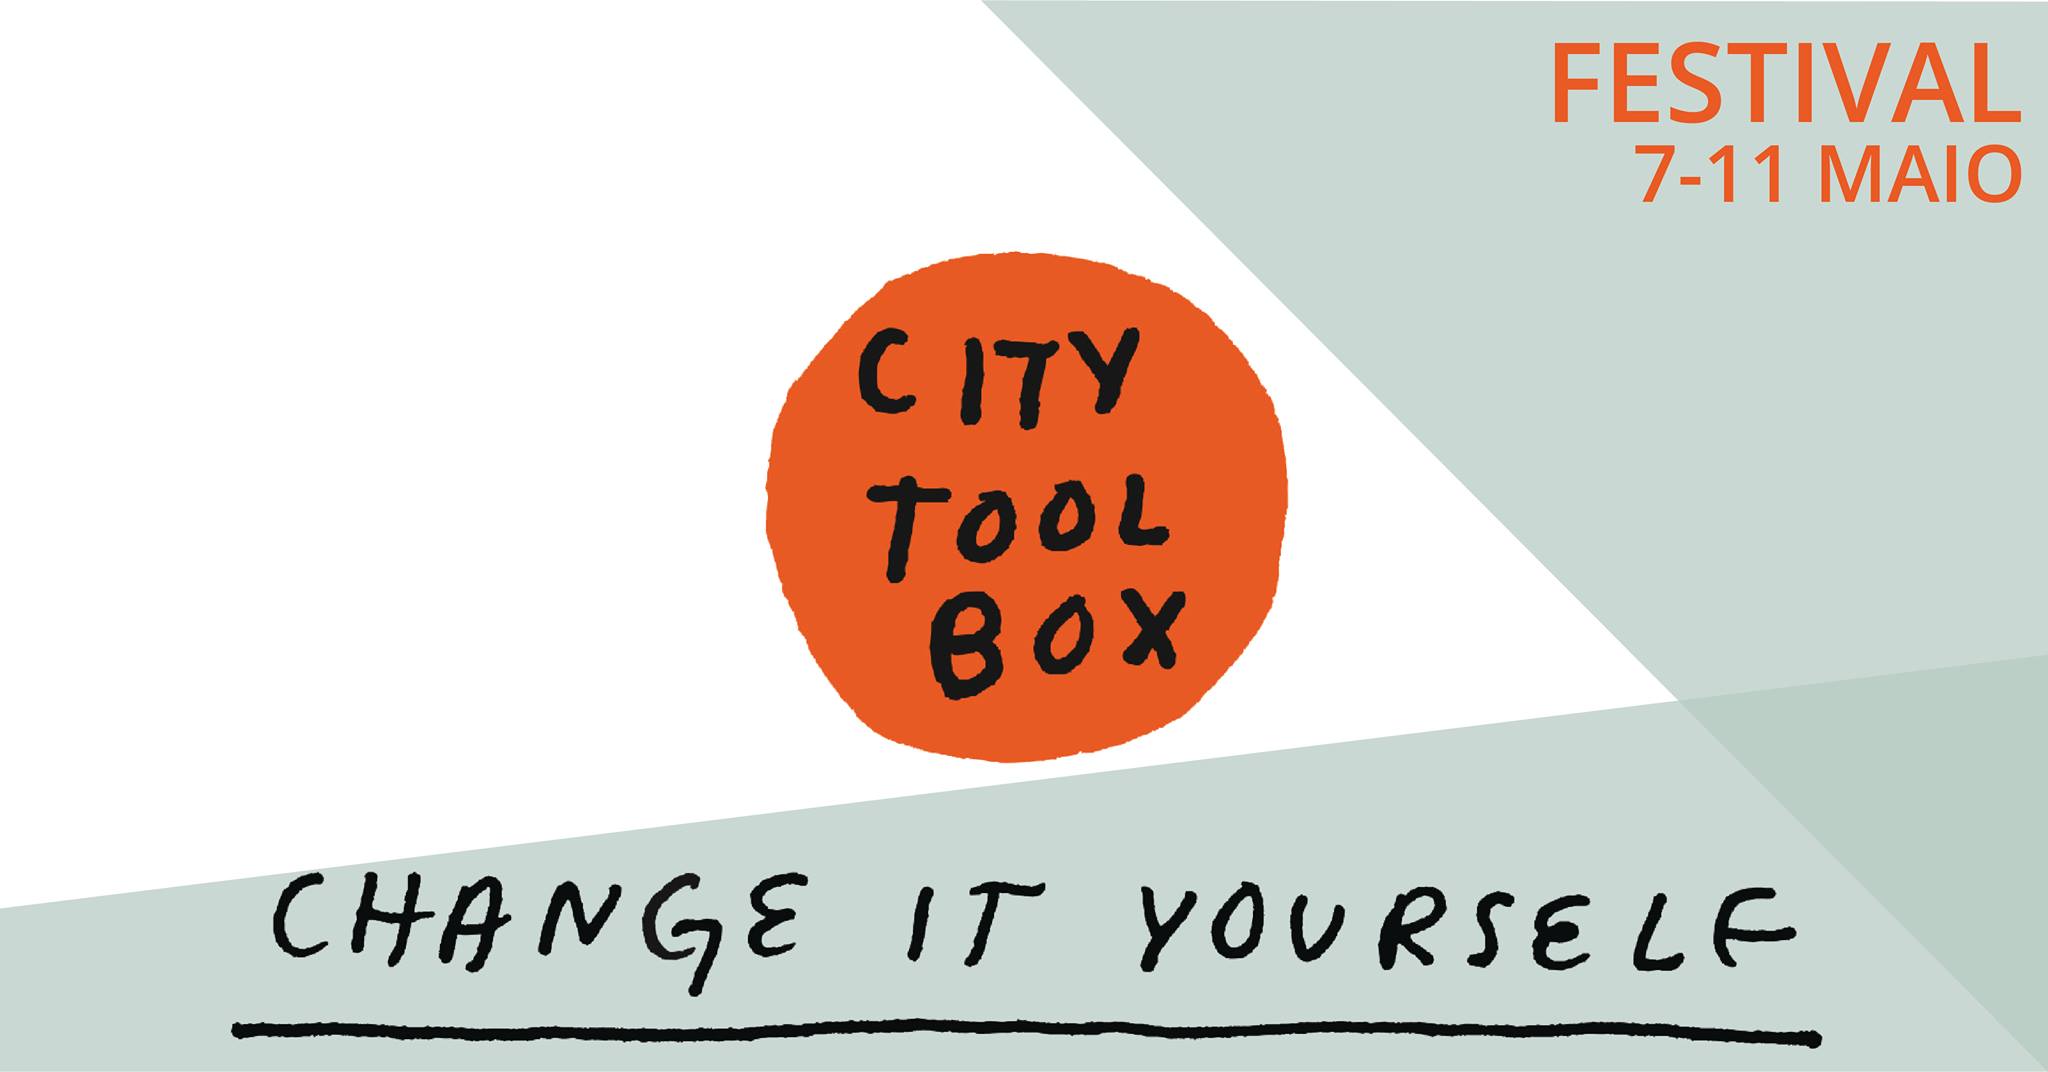 CityToolBox Festival. Building together the city of Aveiro.